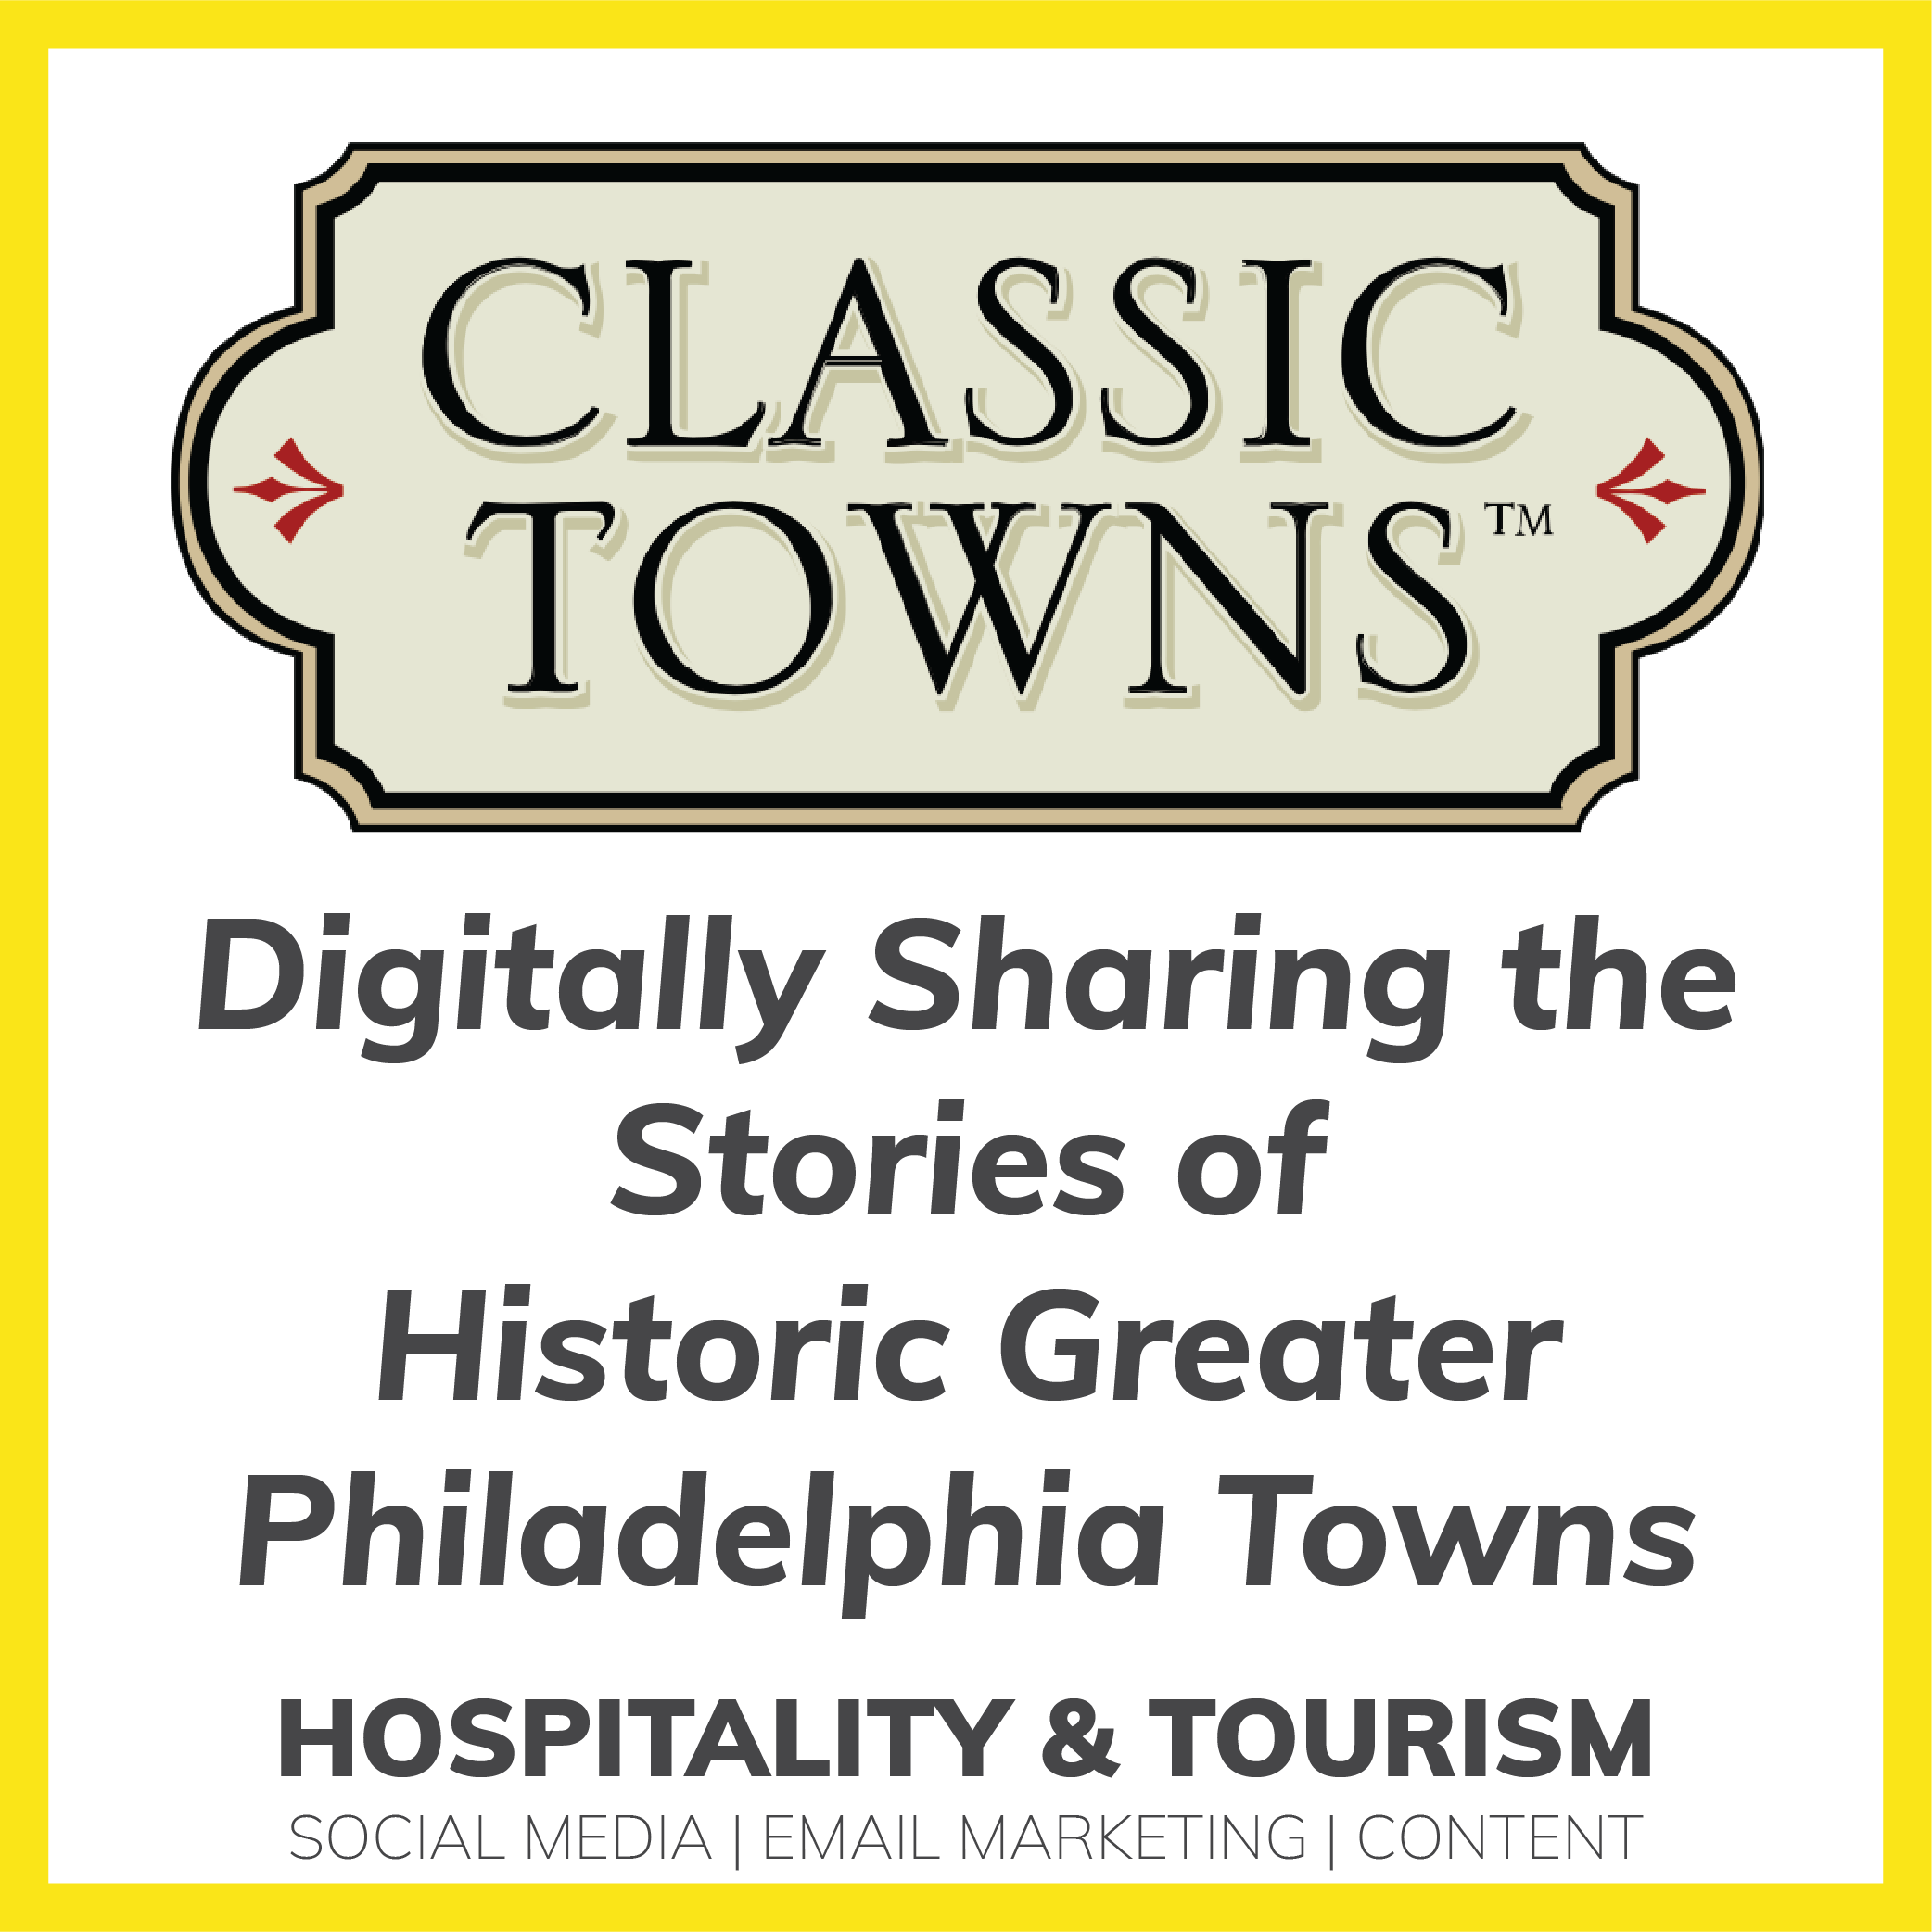 Classic Towns of Greater Philadelphia